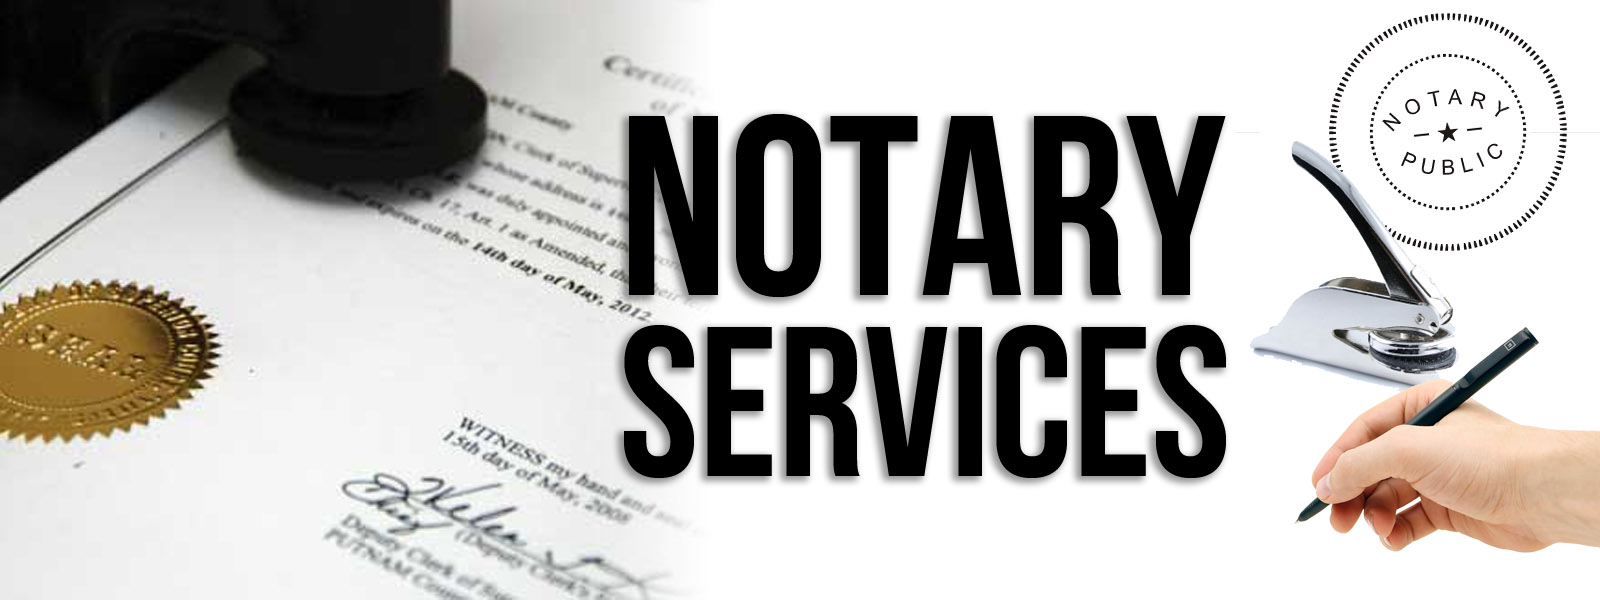 notary-services-now-available-durham-public-library-in-durham-ct